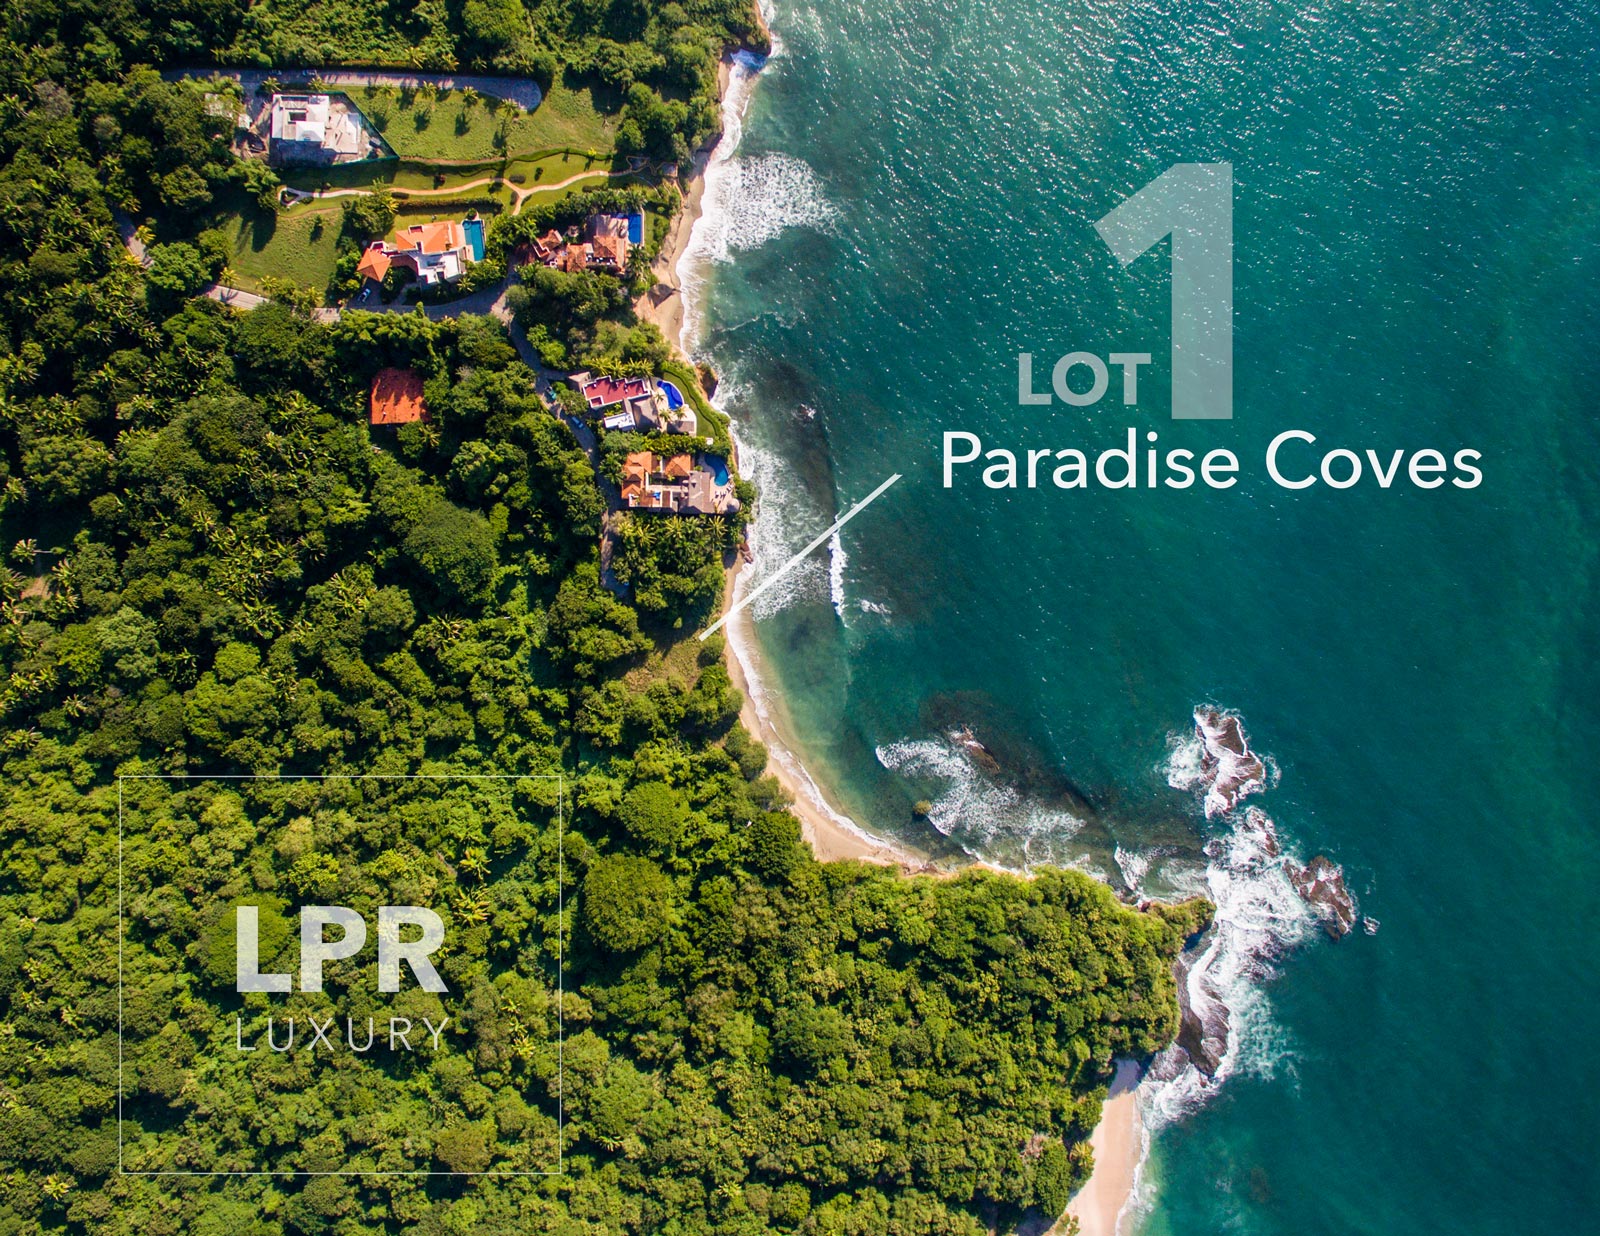 Paradise Coves lot 1 - Punta de Mita, Riviera Nayarit - Residential resort homesite build land and lots for sale in Mexico.